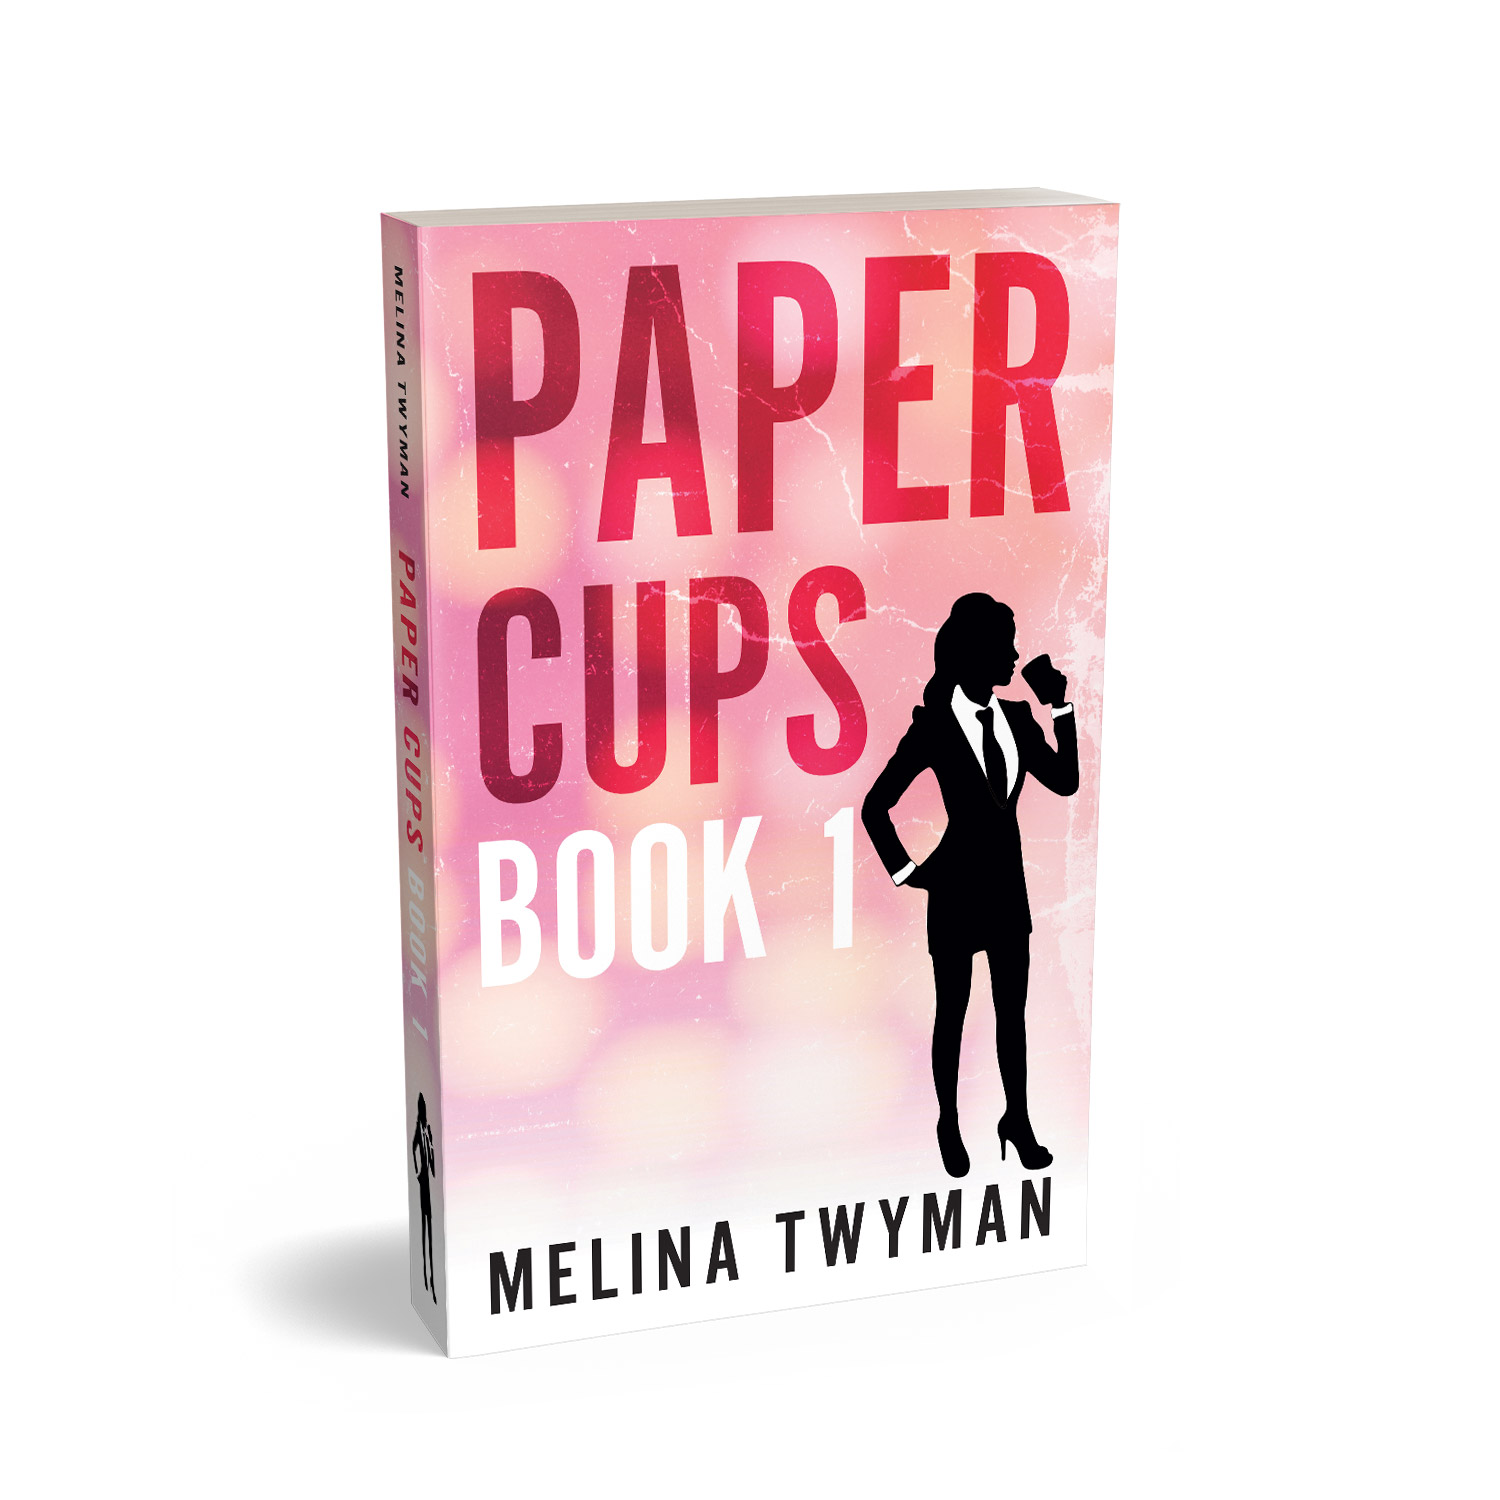 'Paper Cups' is an excellent study of a young woman's struggles with social alcoholism. The author is Melina Twyman. The book cover design and interior formatting are by Mark Thomas. To learn more about what Mark could do for your book, please visit coverness.com.